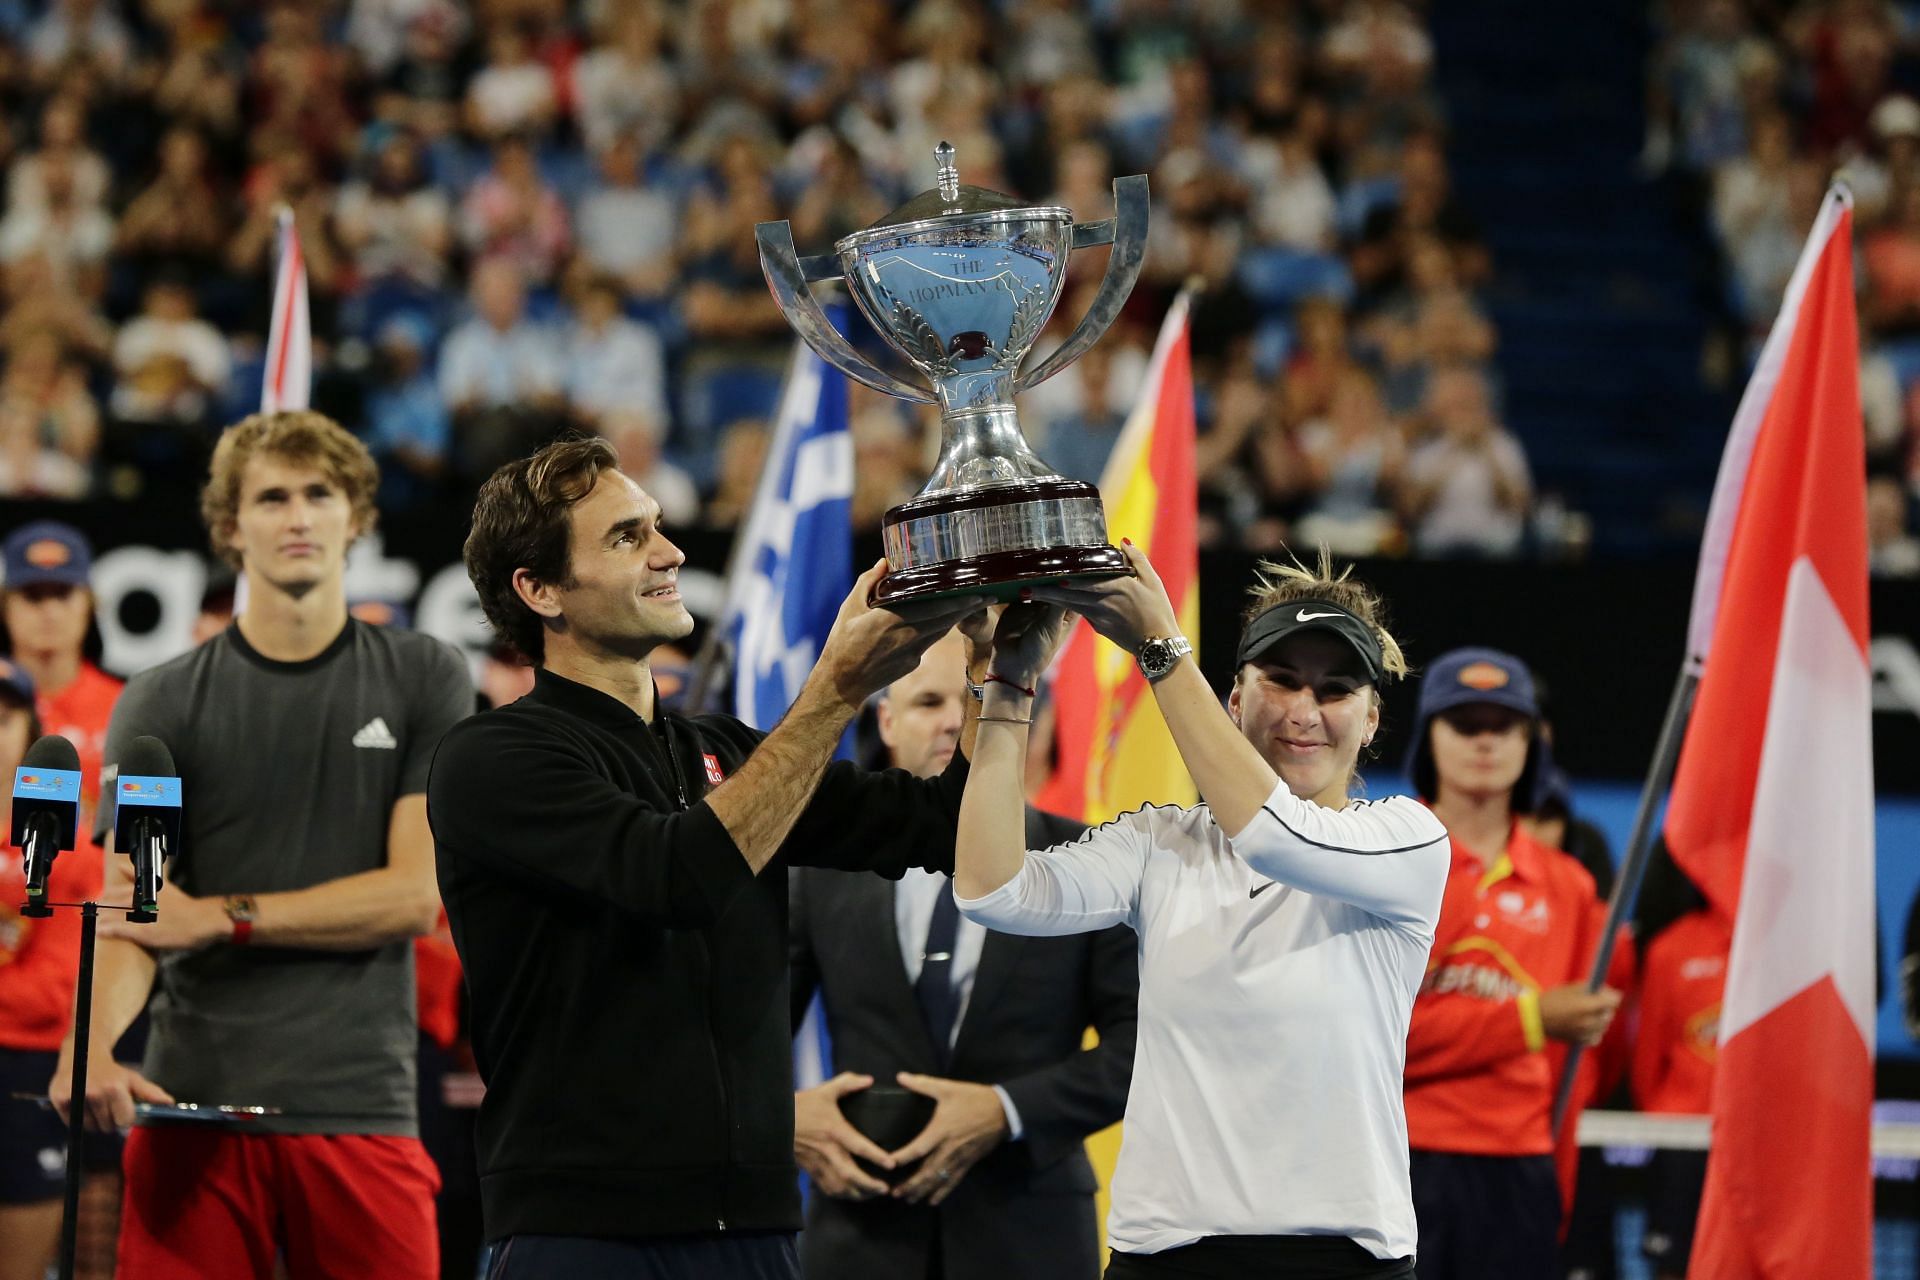 Roger Federer and Belinda Bencic with the 2019 Hopman Cup